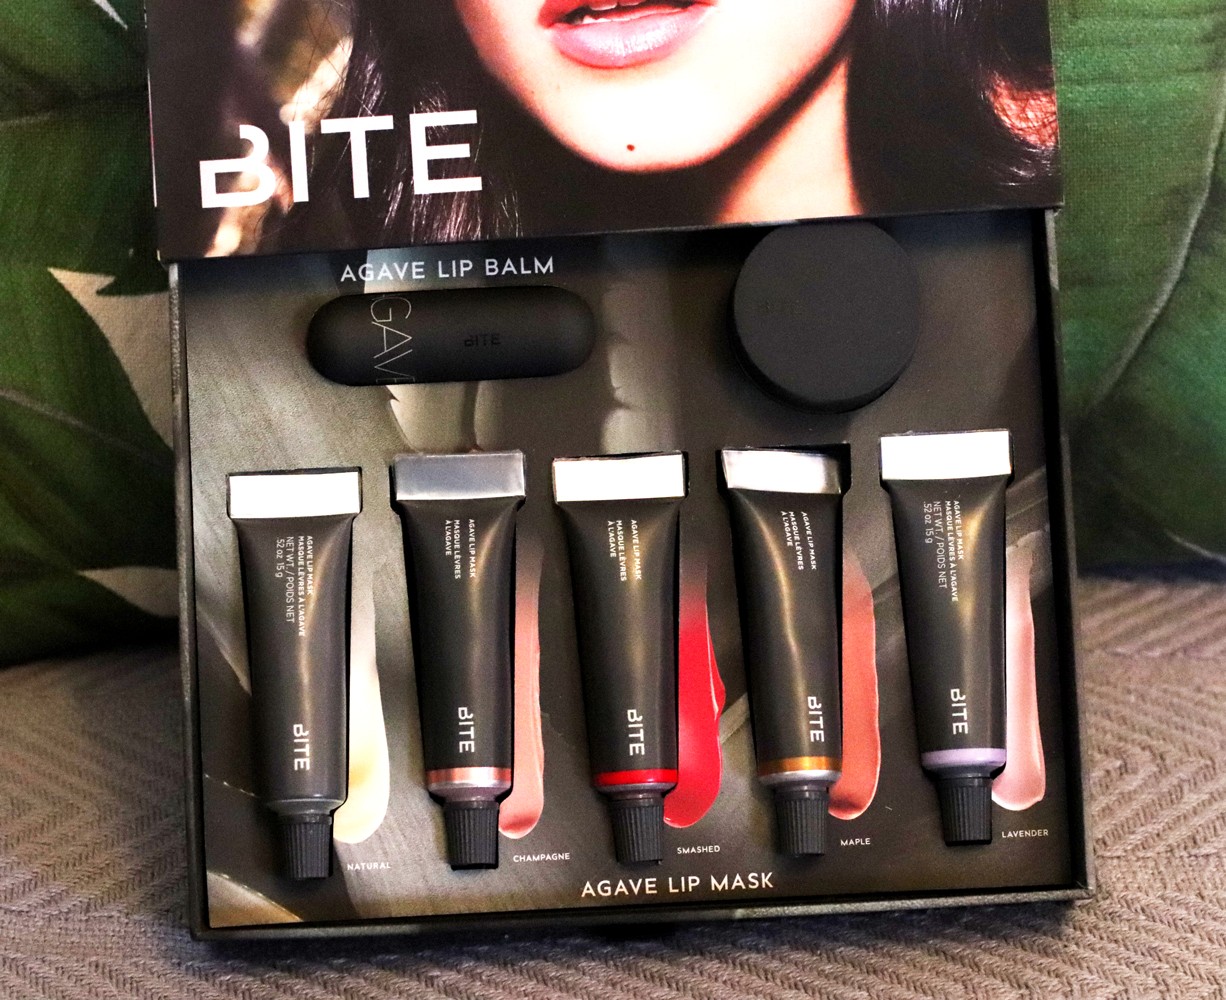 Bite Beauty Agave Lip Mask Review - Create Your Own Cruelty Free Lipstick at Lip Lab By BITE | Sharing a Review and Experience featured by popular Los Angeles cruelty free beauty blogger My Beauty Bunny